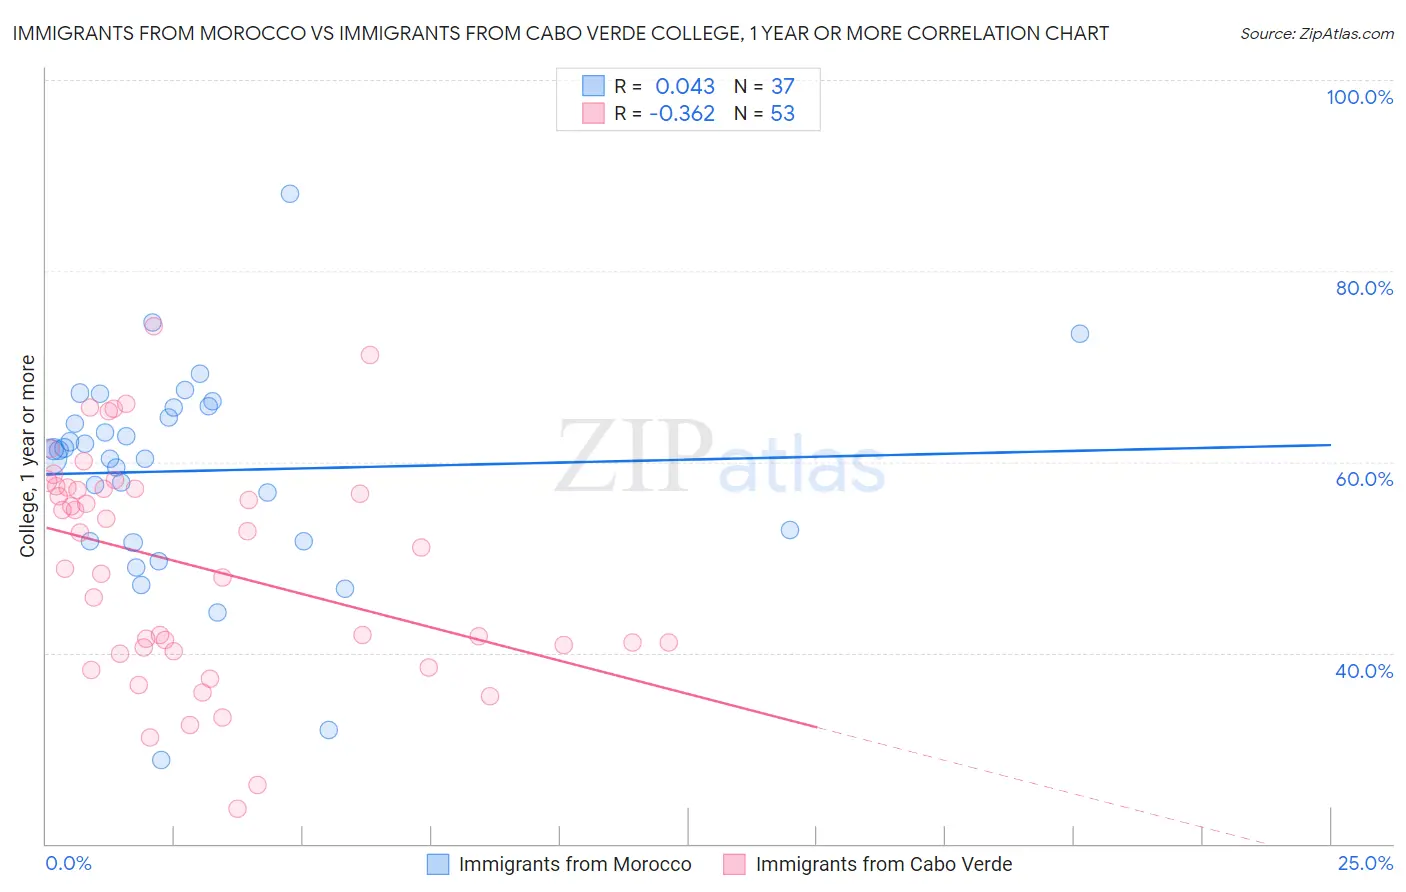 Immigrants from Morocco vs Immigrants from Cabo Verde College, 1 year or more